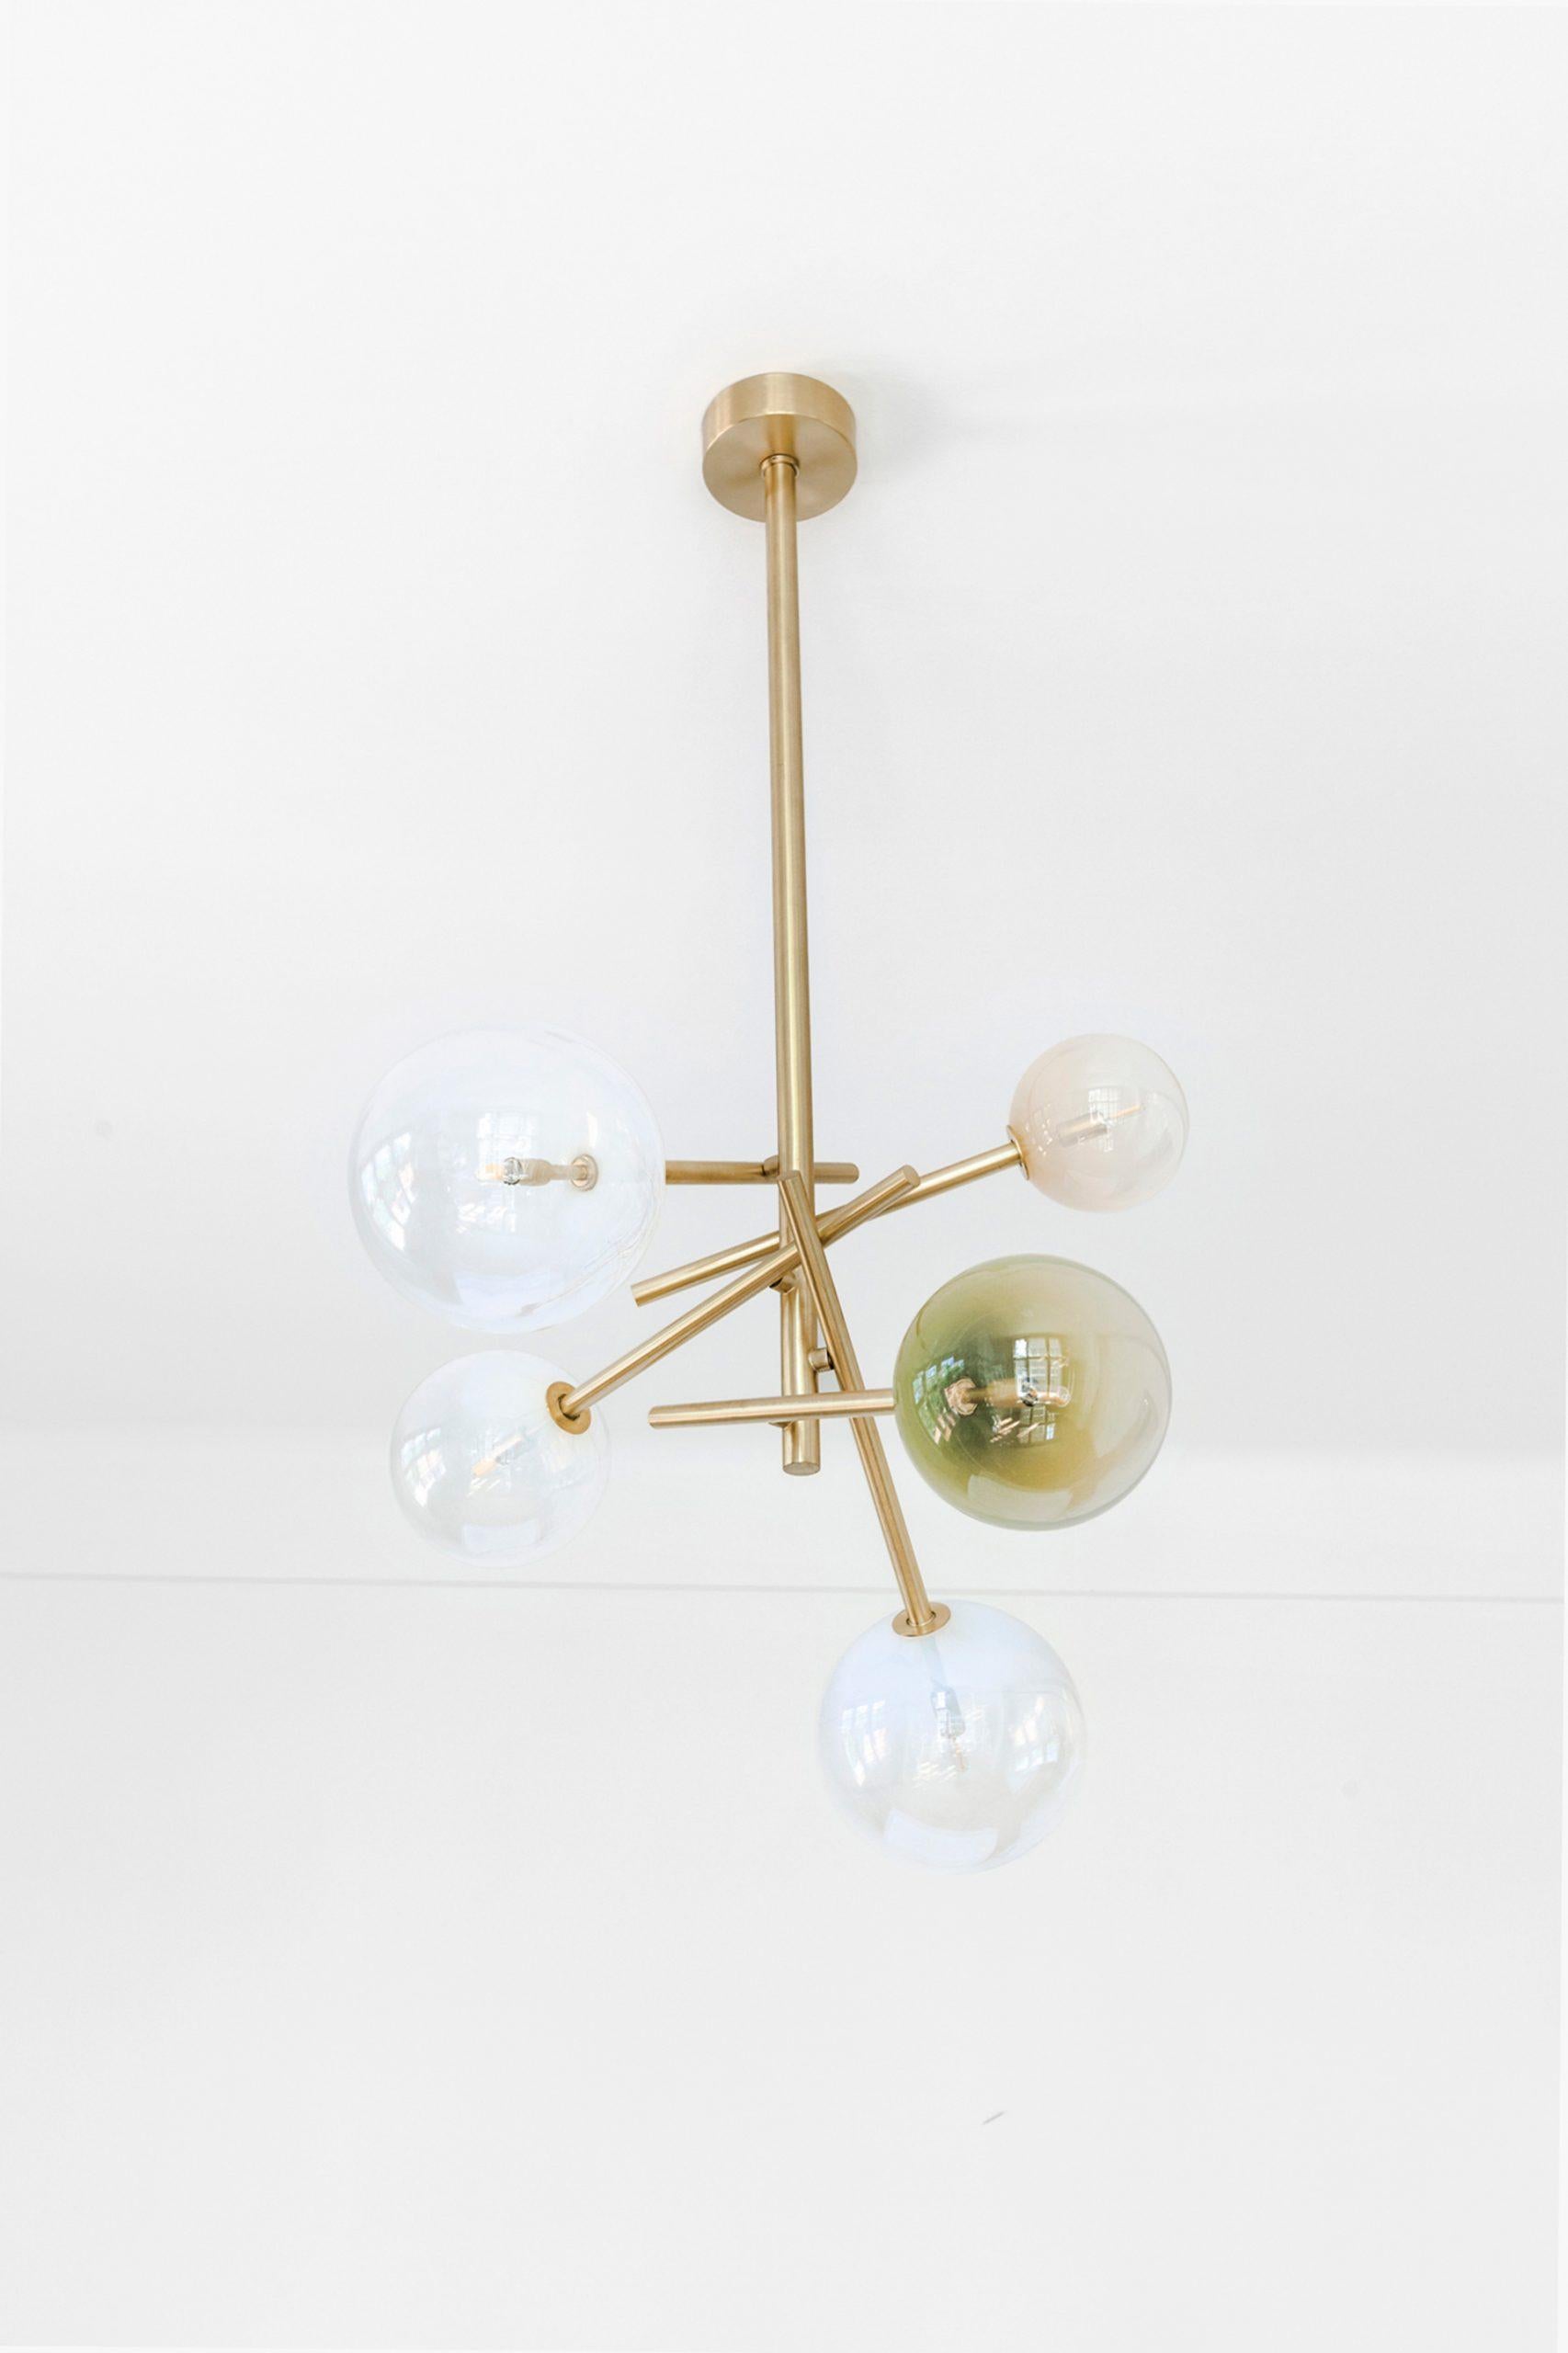 Penta pendant light by Dechem Studio.
Dimensions: D 150 x H 200 cm.
Materials: brass, glass.
Available in different glass colors.

The chandelier combines a deconstructed and newly arranged brass structure with hand-blown glass shades in